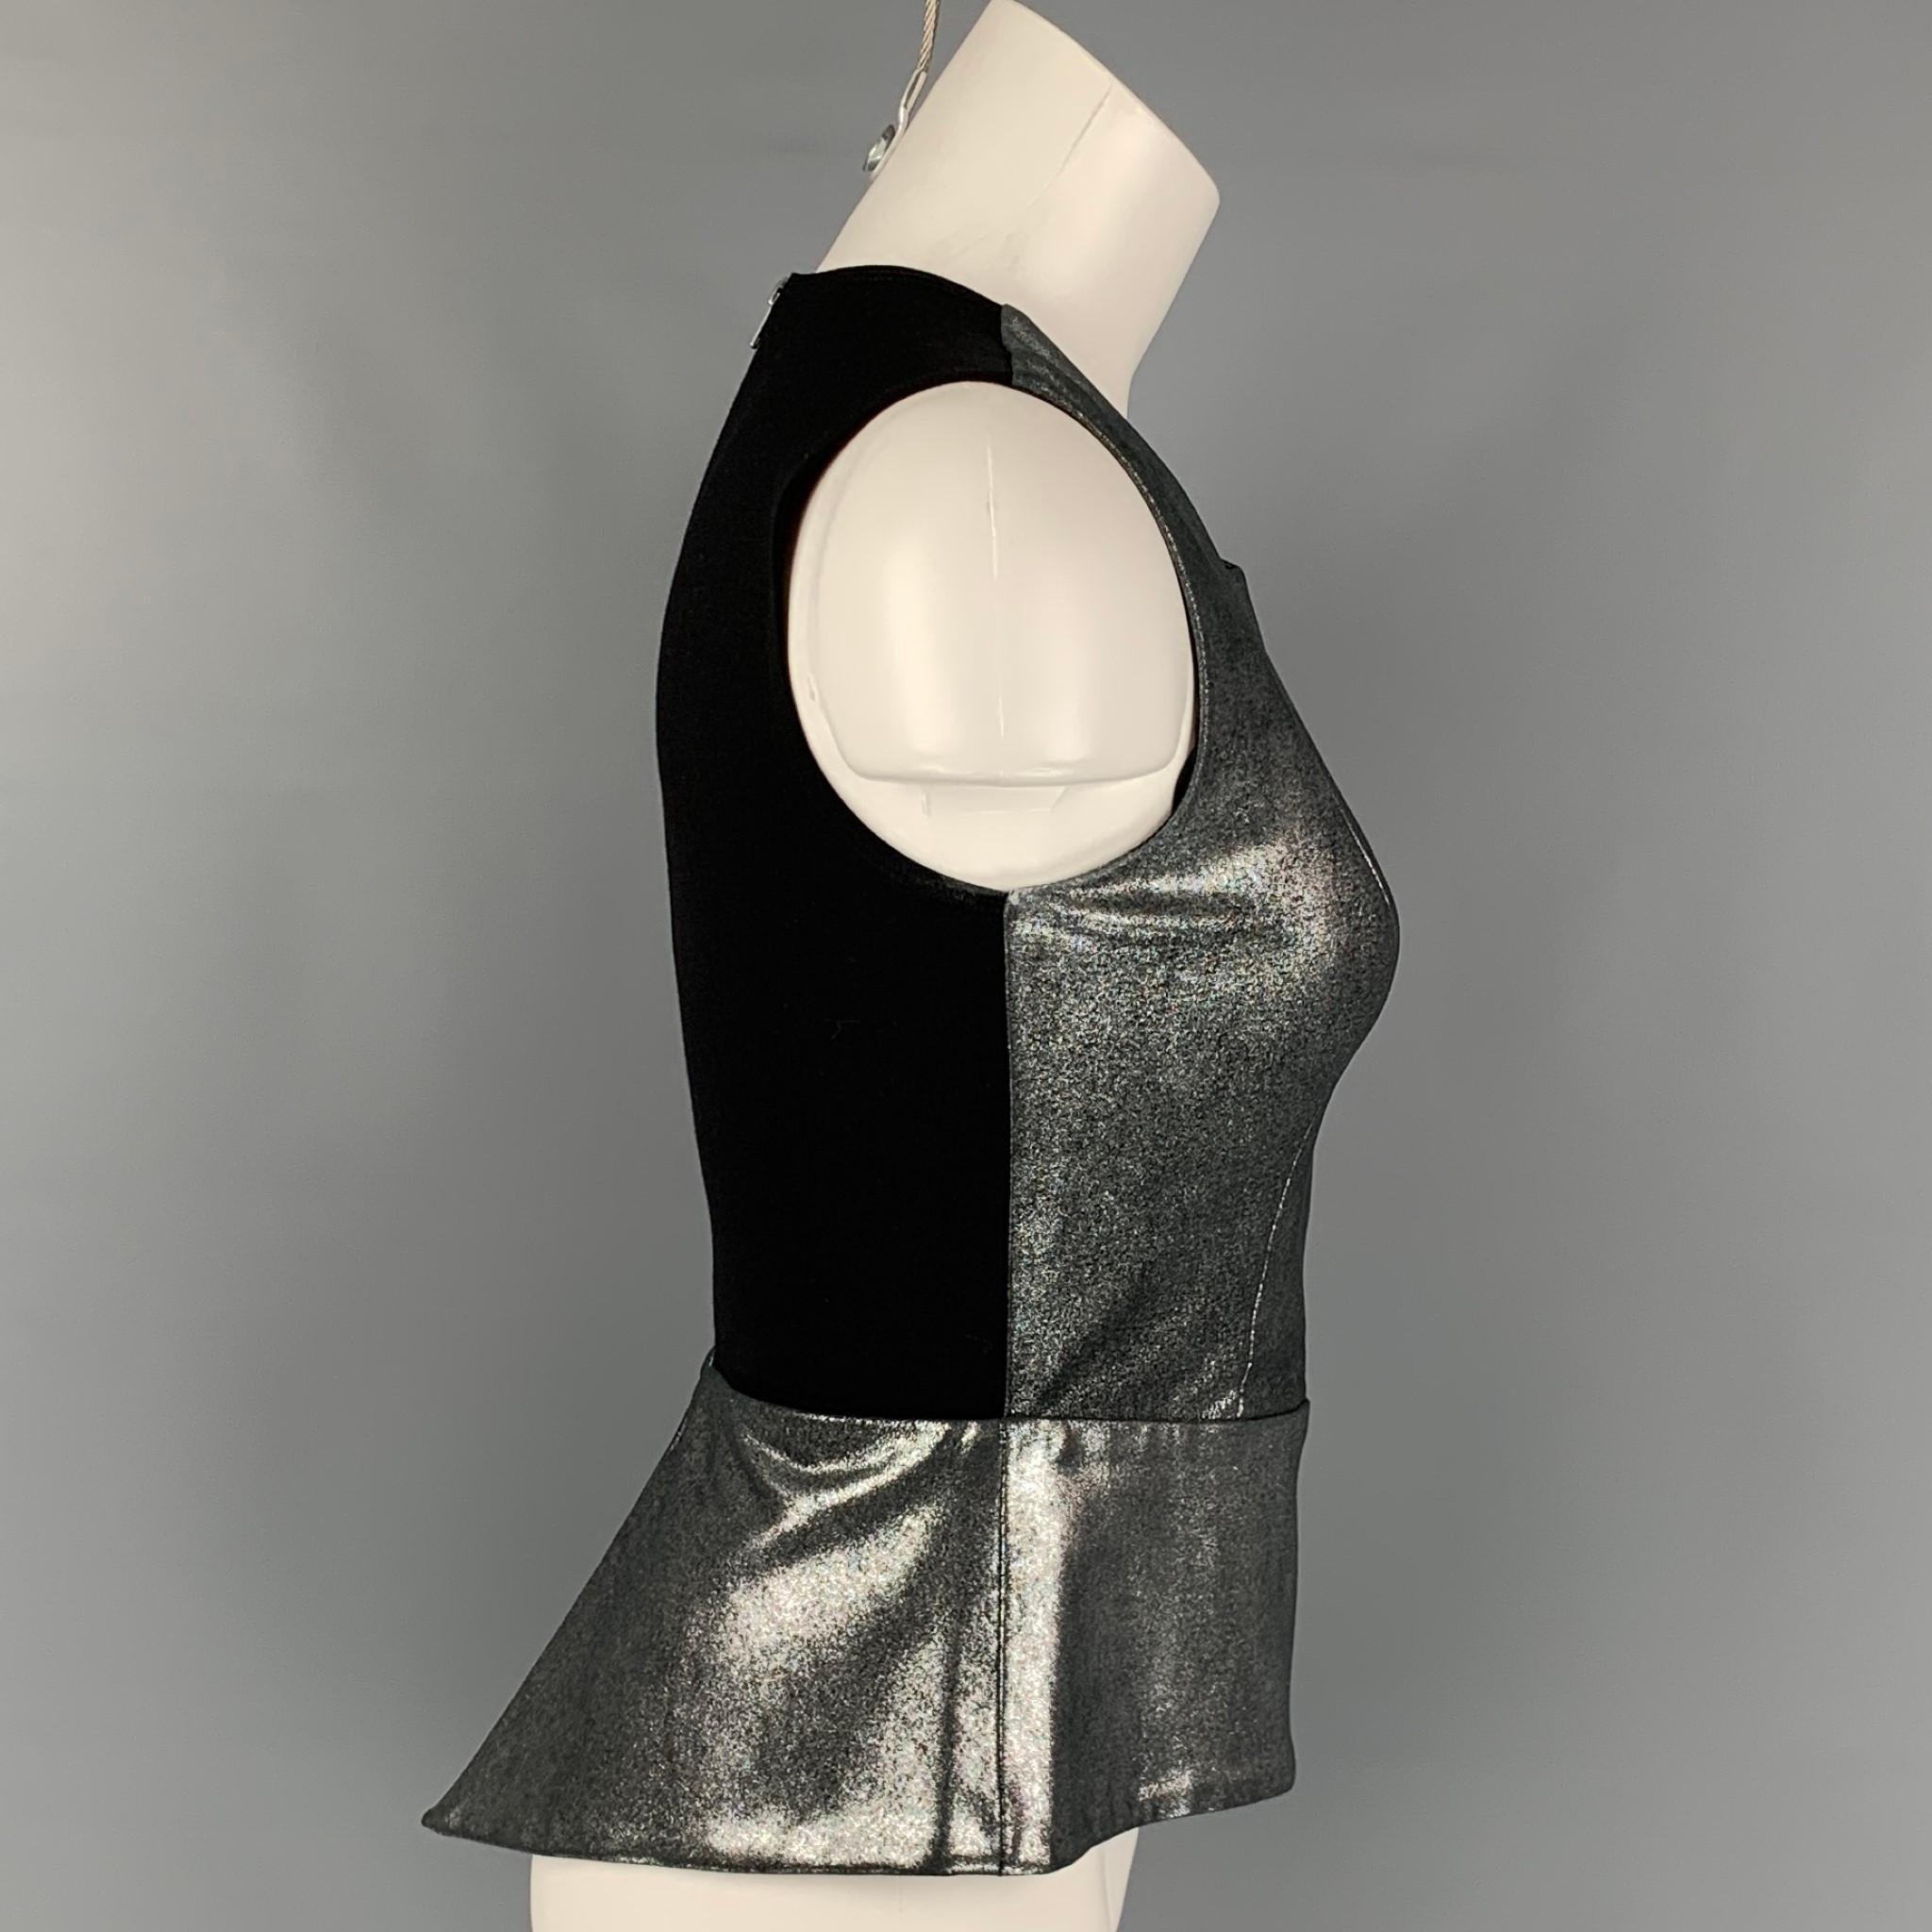 MASON x BARNEY'S NEW YORK casual top comes in a silver lambskin leather with a black rayon blend back featuring a peplum style and a back zipper closure. Made in USA. 

Very Good Pre-Owned Condition.
Marked: 0

Measurements:

Shoulder: 13 in.
Bust: